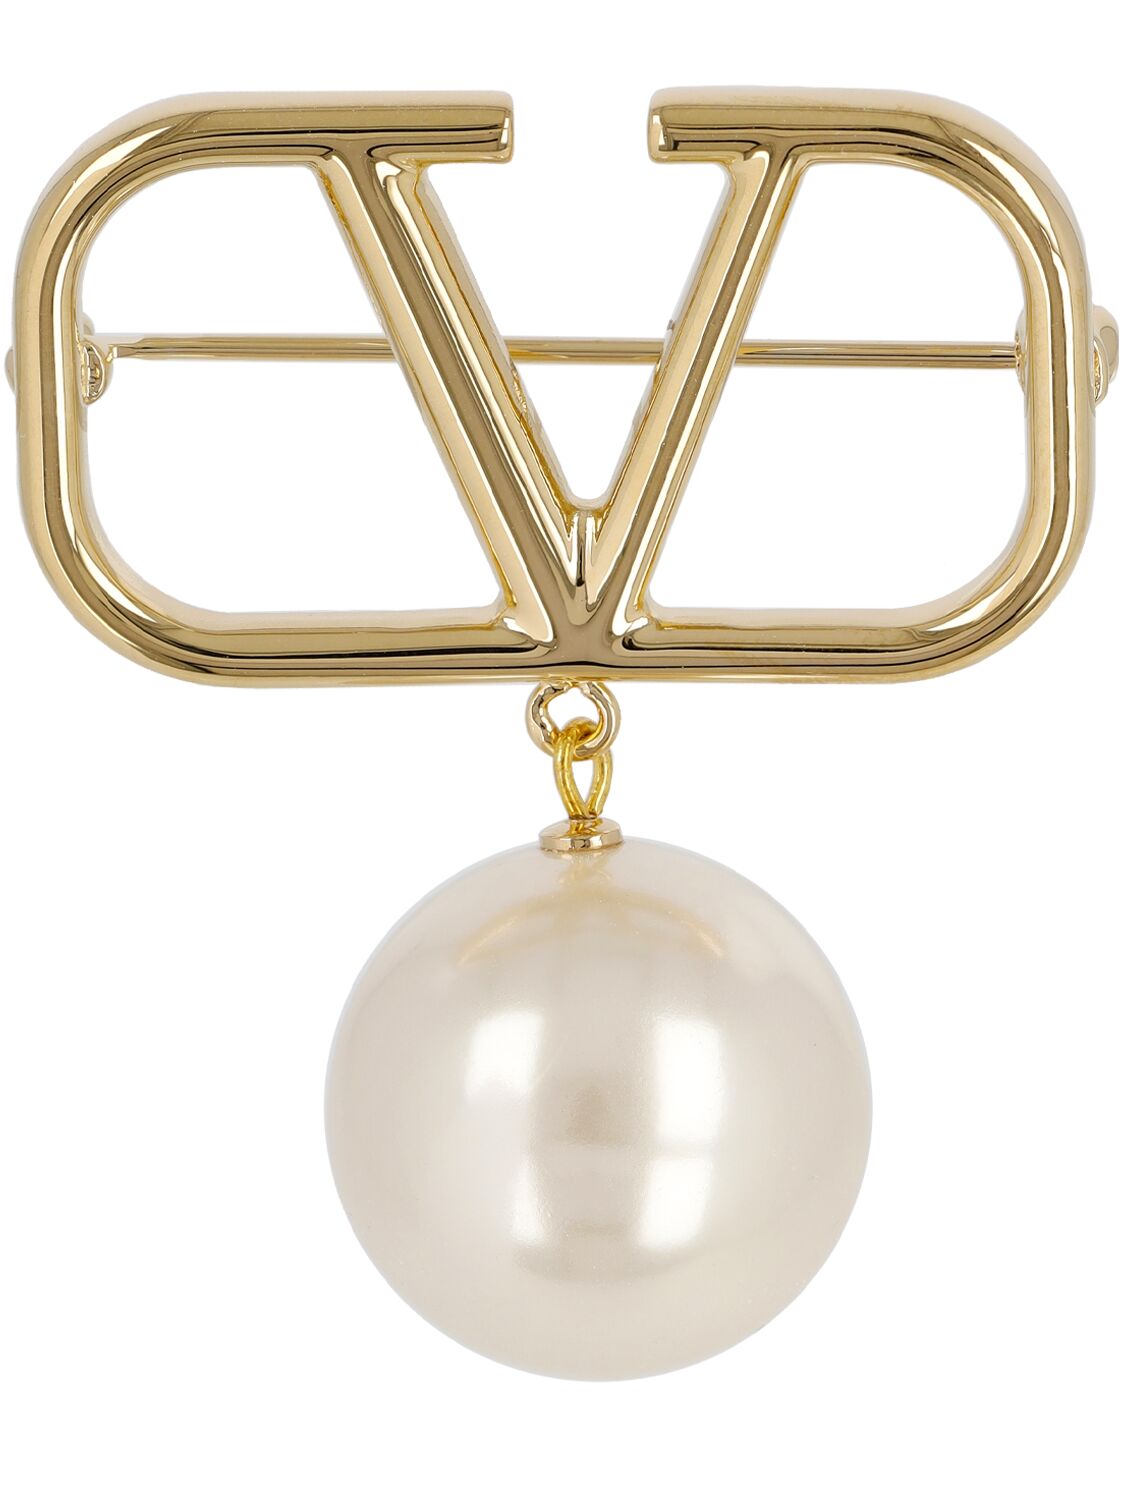 Image of V Logo Signature Faux Pearl Brooch